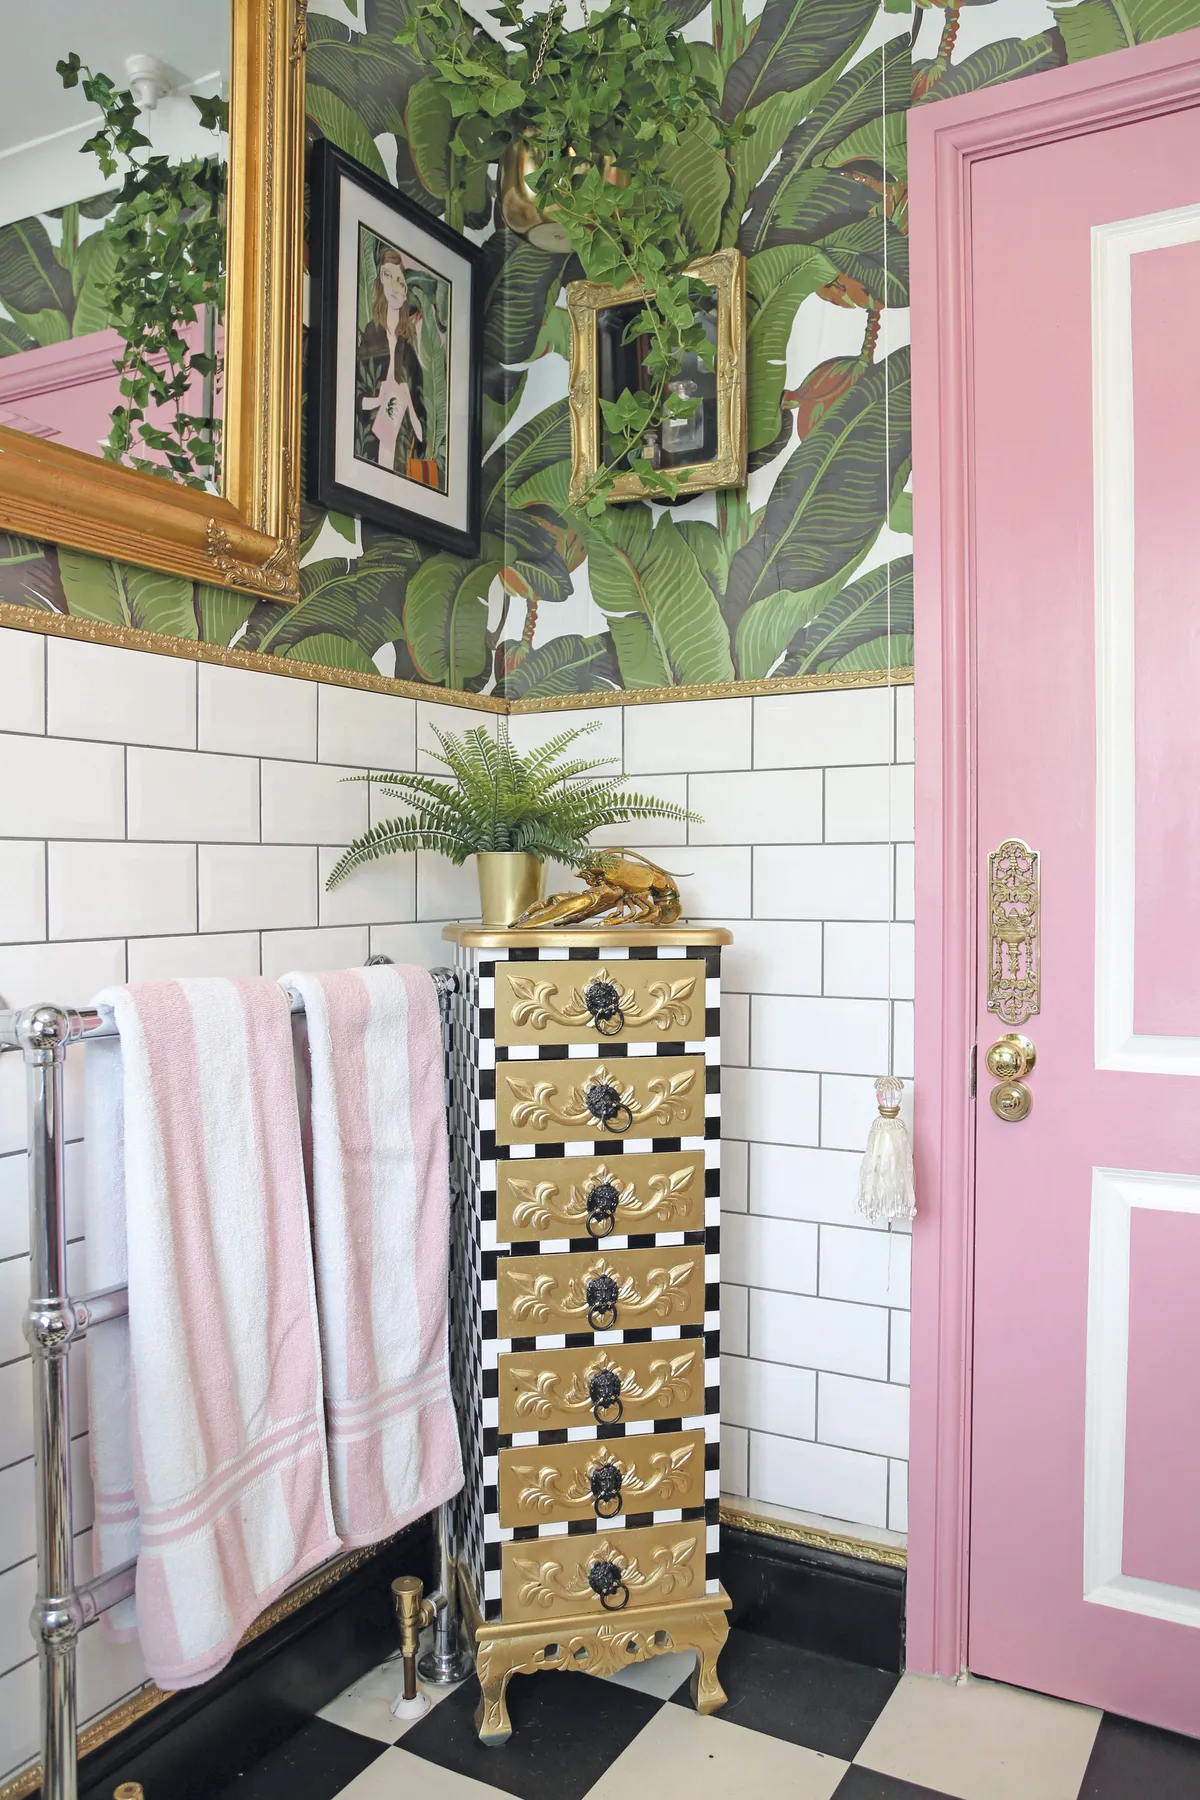 To give the tallboy a refresh, Hayley covered it with decorative sticky- back vinyl and painted the drawer fronts gold. She gave the door a lick of pink paint to reinforce the Beverly Hills theme